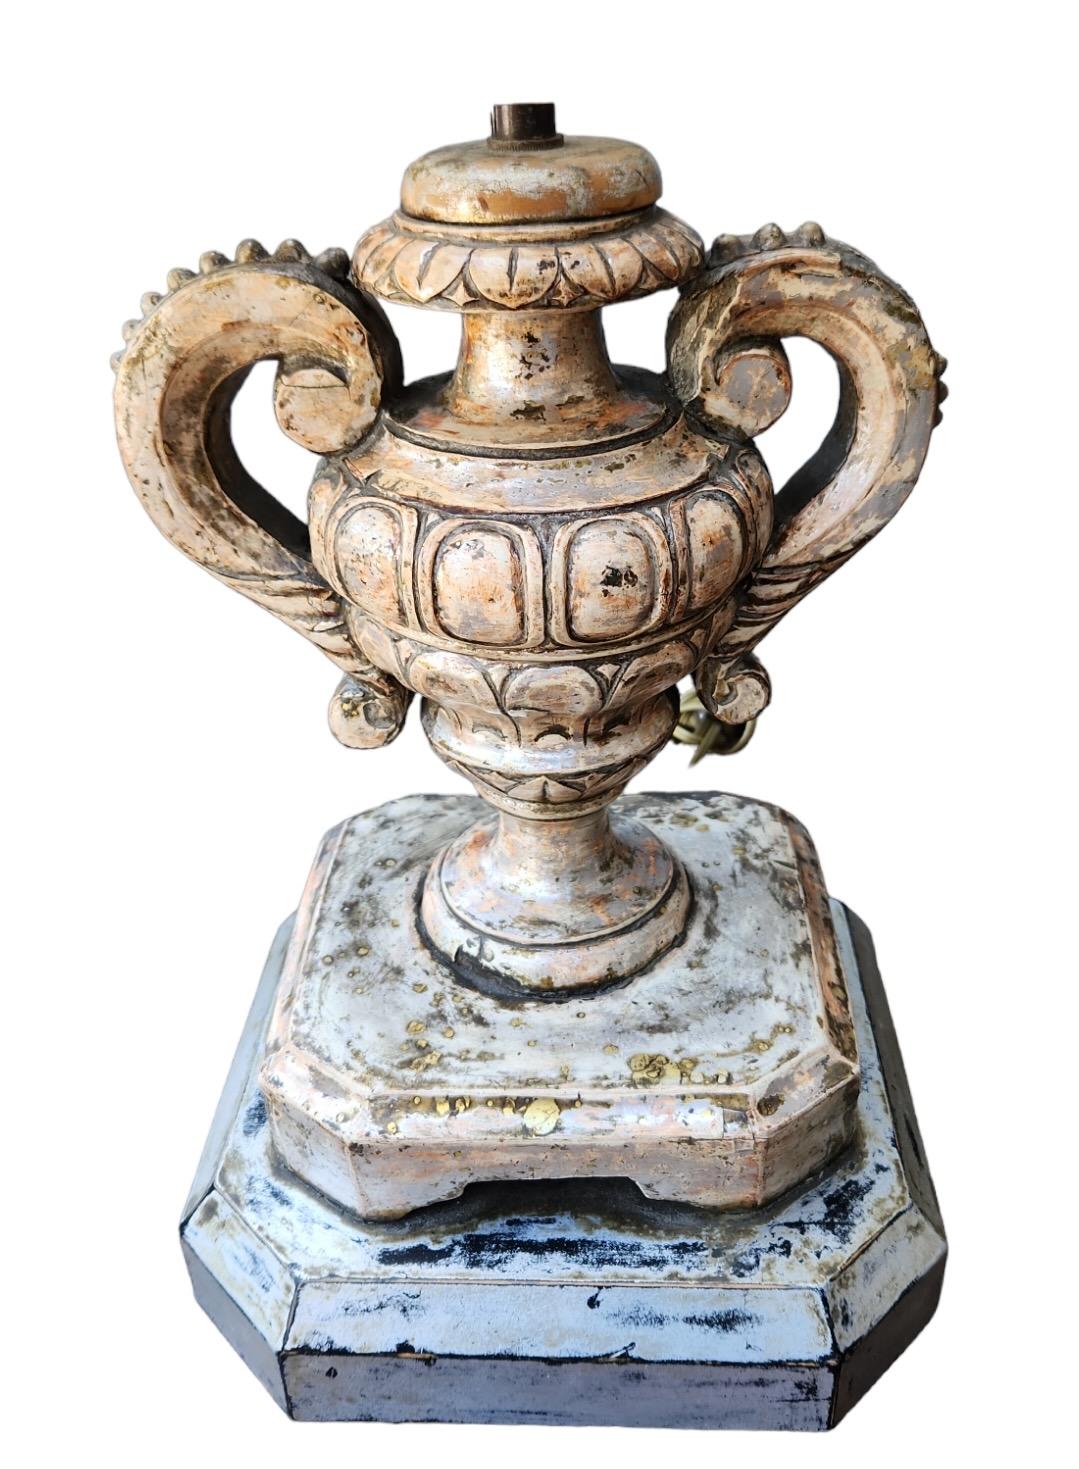 18th century Silver leafed, carved wood handled urns converted to lamps. On new bases with custom parchment shades.